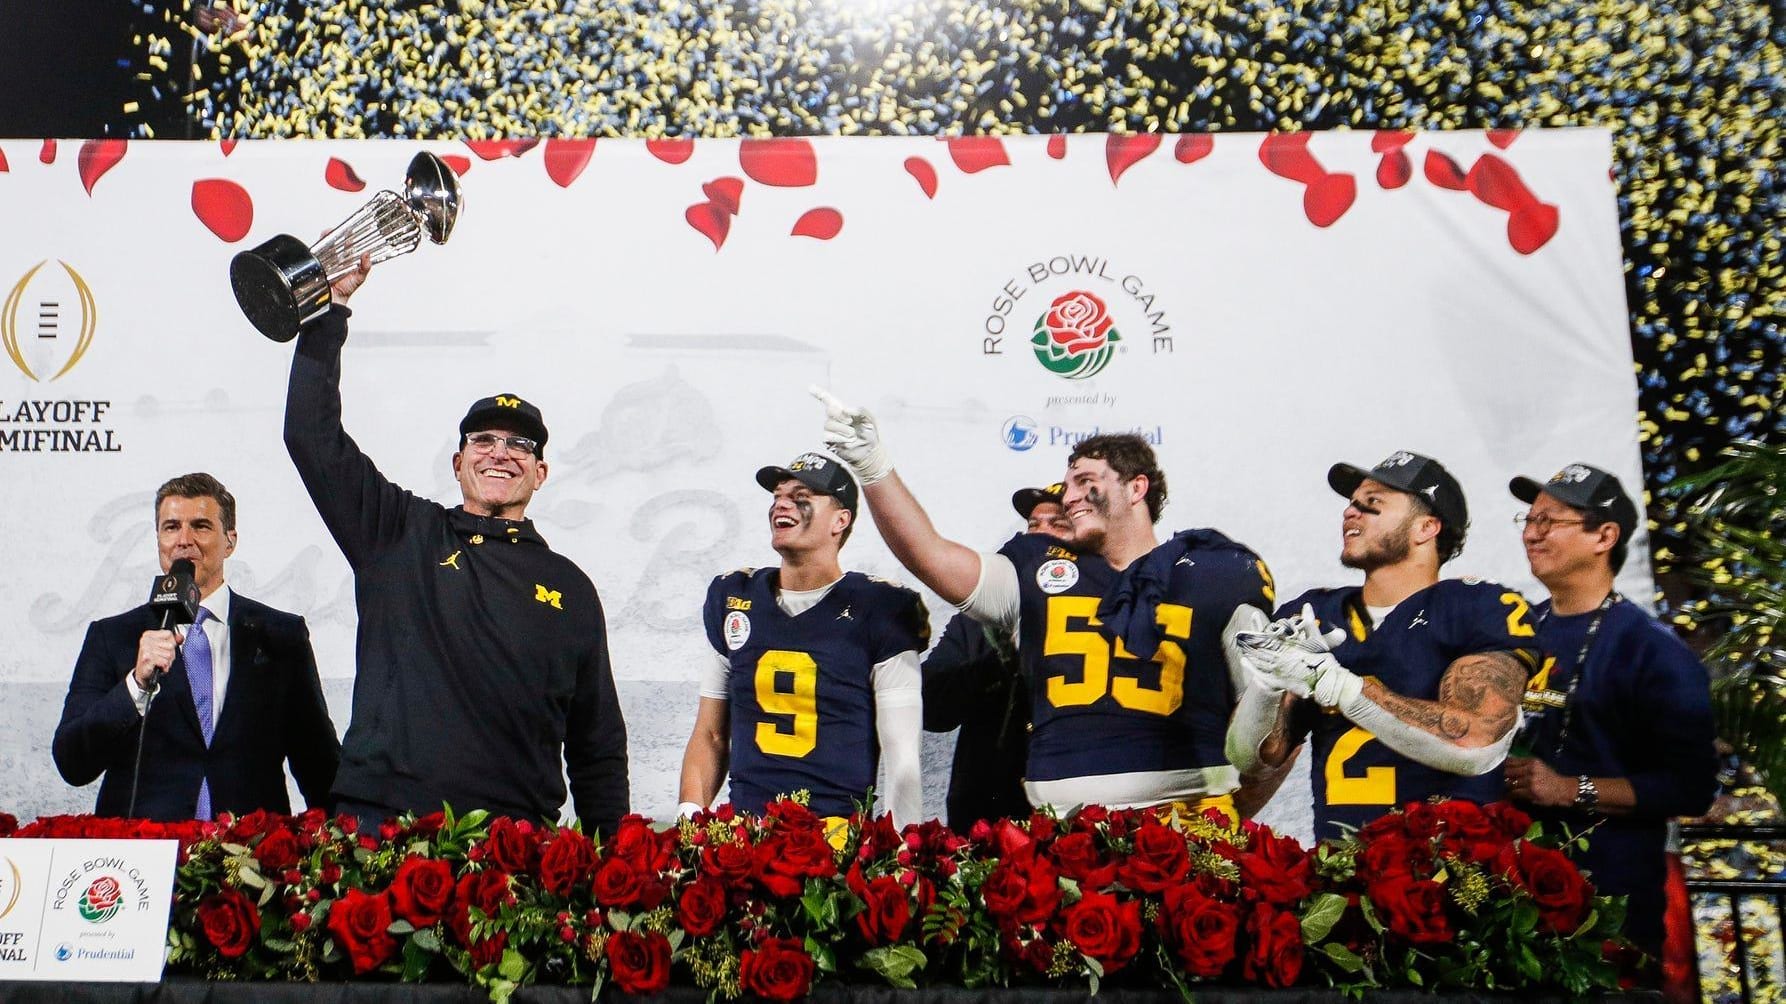 Chargers News: Jim Harbaugh Drafts Michigan Comrade With No. 69 Pick In Third Round